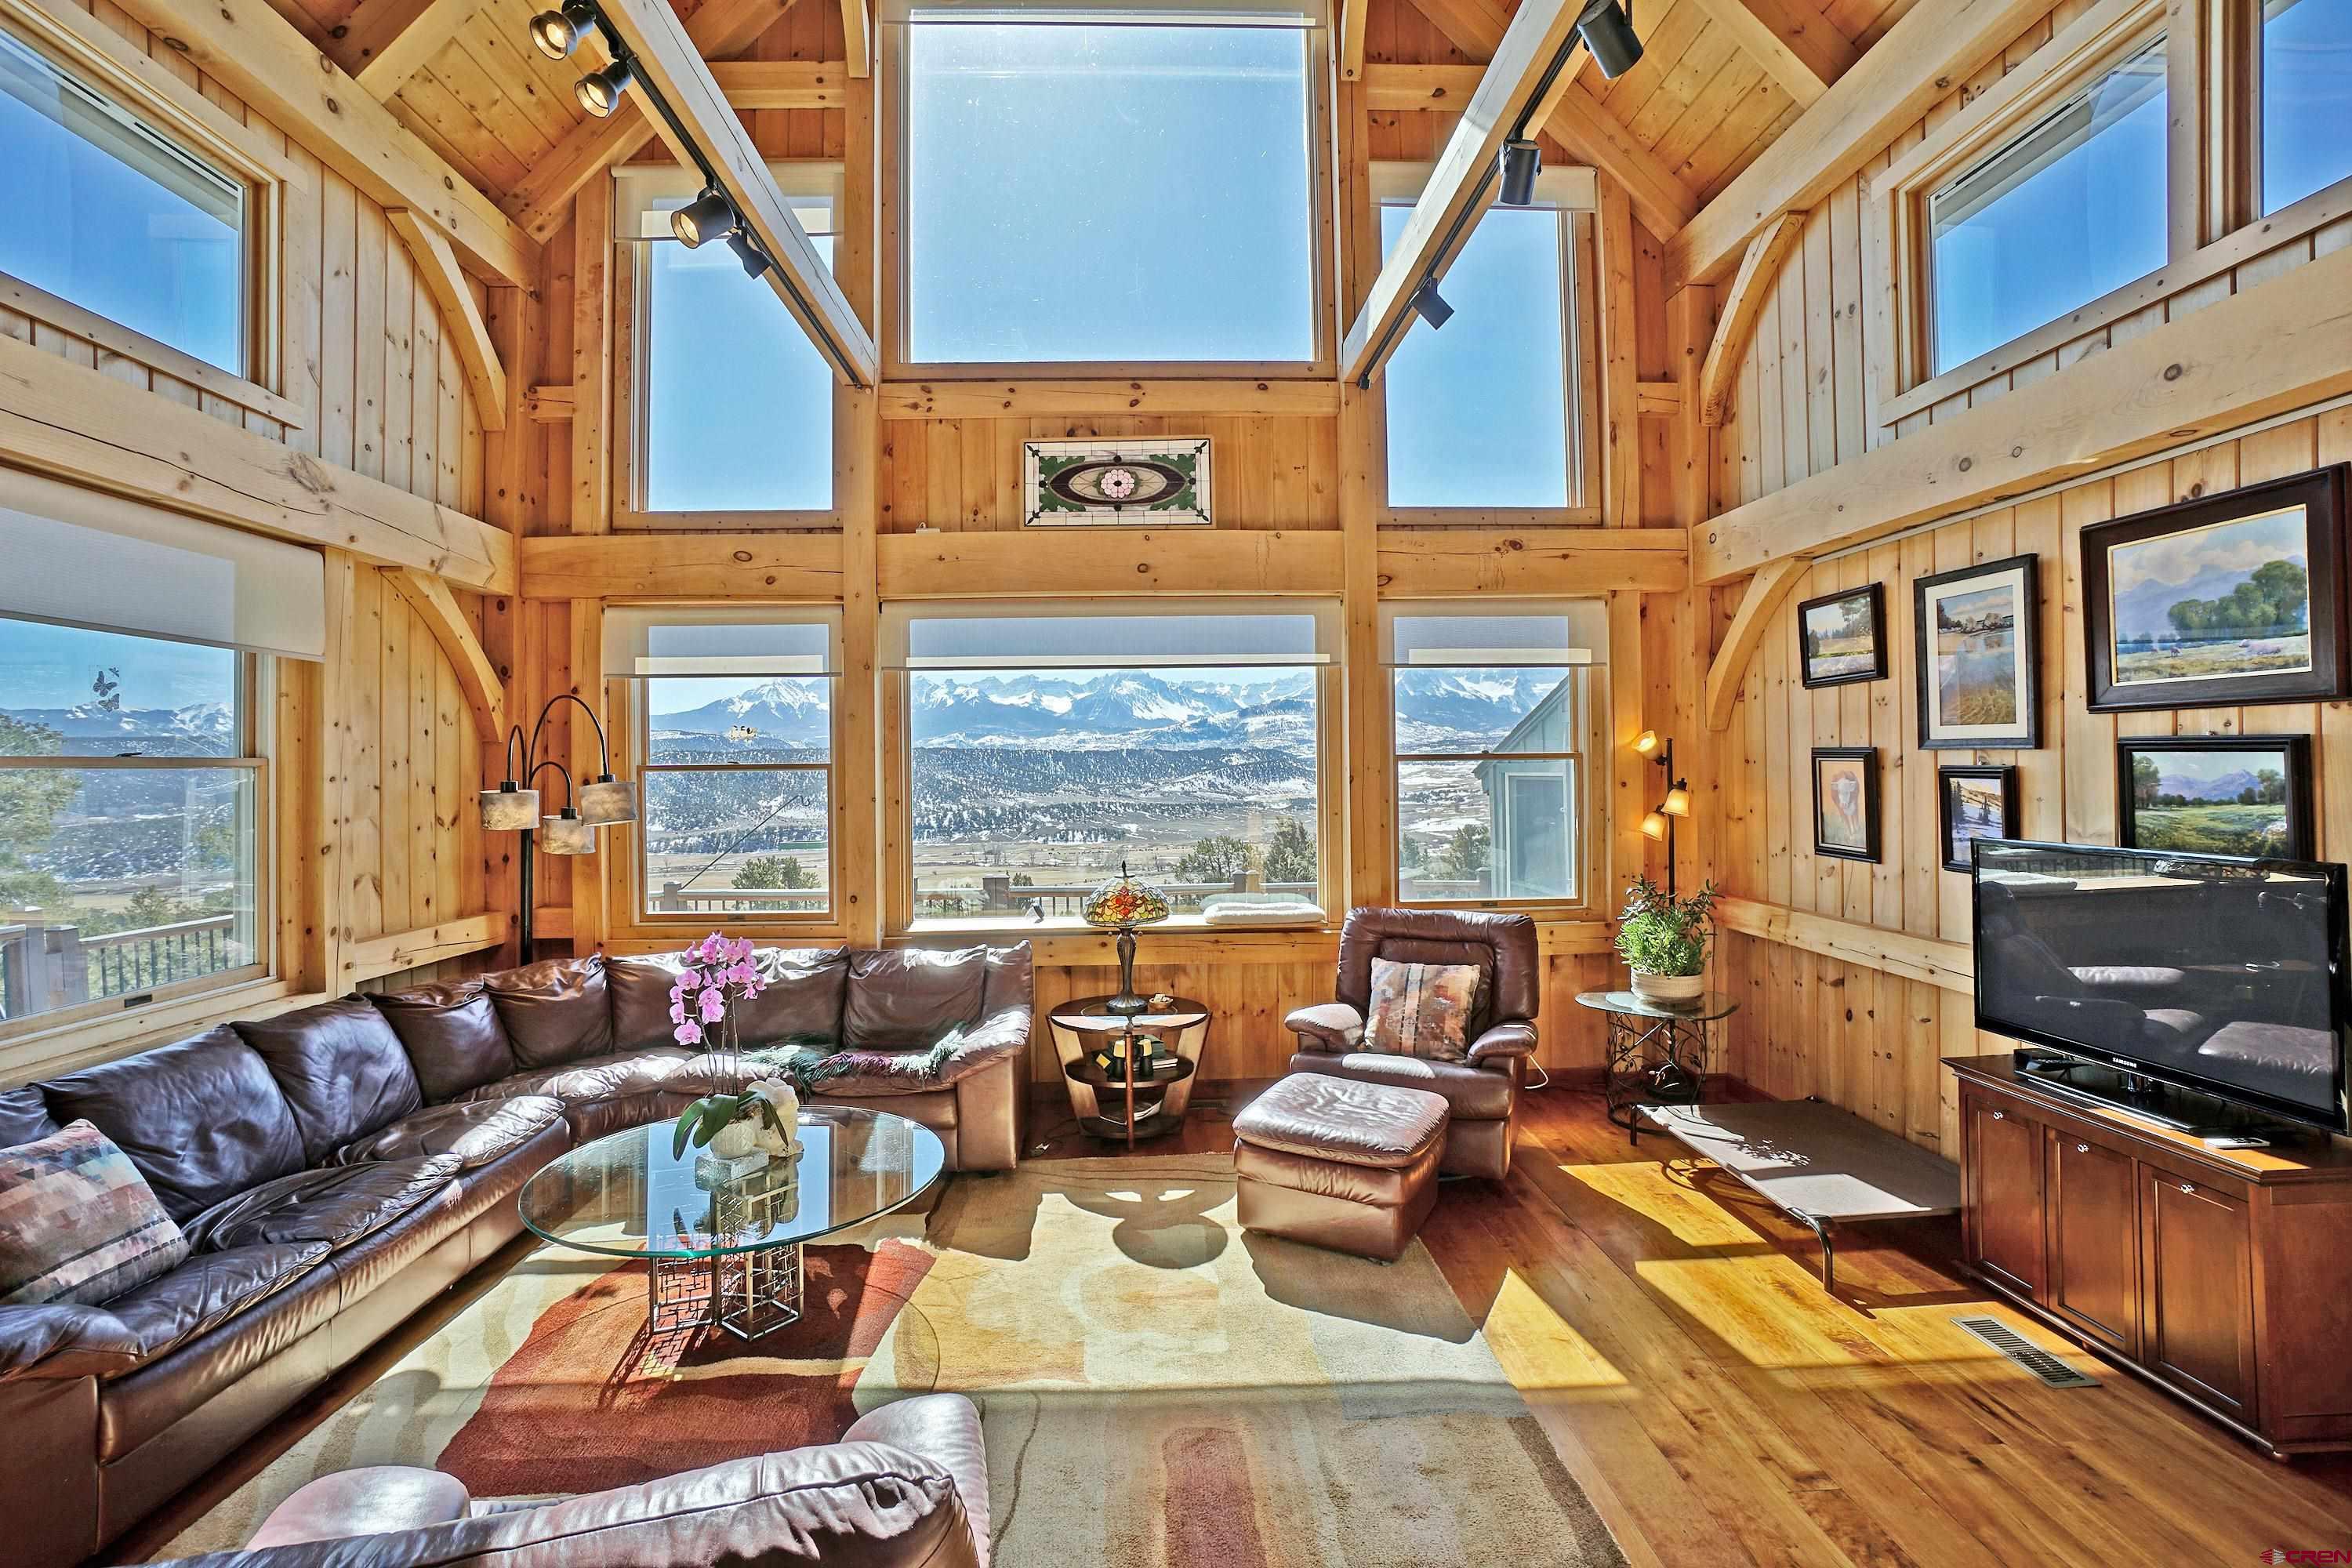 When you think of the Colorado and your dream home, it is about the mountain views.   You want a home with the BIG mountain views.   What does that mean?  You want to see Mt Sneffels framed by your living room windows.  You want to see all of the San Juans and all of the Cimarron Mountains.   You want to see Chimney Peak and the Courthouse turn yellow, orange, pink, lavender with the evening Alpenglow.   This Pleasant Valley 4 bedroom, 3 bath home situated on 3.14 acres checks all of the boxes.   Come in the front door and immediately you are surrounded by the cozy warmth of post and beam construction.  The open floor plan flows from living room, kitchen and  to dining room.  2 Sided Fireplace warms living room and kitchen open space.  There are 2 master suites, one on the main level and one on the upper level.  The lower level features 2 bedrooms, one full bath, living room, sun room and walk out to the garden.  It is a home which invites the outside inside with decks bounding the dining room and living room.  Need space for vehicles and toys?  Got it with an oversized 2 car detached garage with studio space above.  Well established yard and garden with drip system is fenced for you and your pets enjoyment.  Pleasant Valley is known for its magnificent mountain and valley views.  It is a location close to where you want to go.  15 mins to the Town of Ridgway, 40 minutes to Telluride, less than an hour to the Montrose Airport.    Hike, bike, walk, run right from your front door.